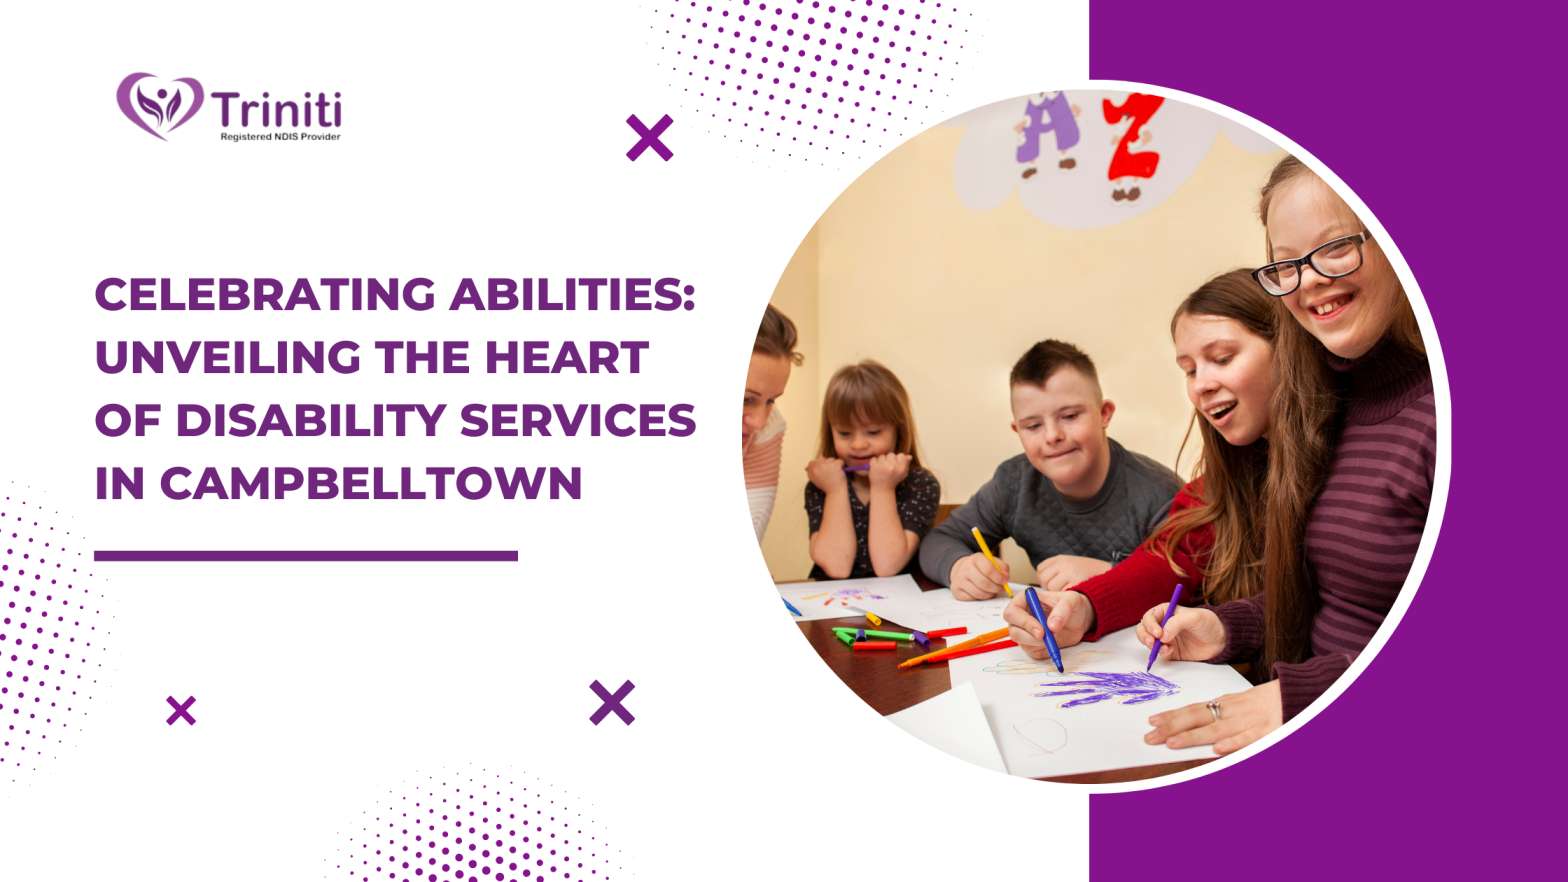 Celebrating Abilities: Unveiling the Heart of Disability Services in Campbelltown